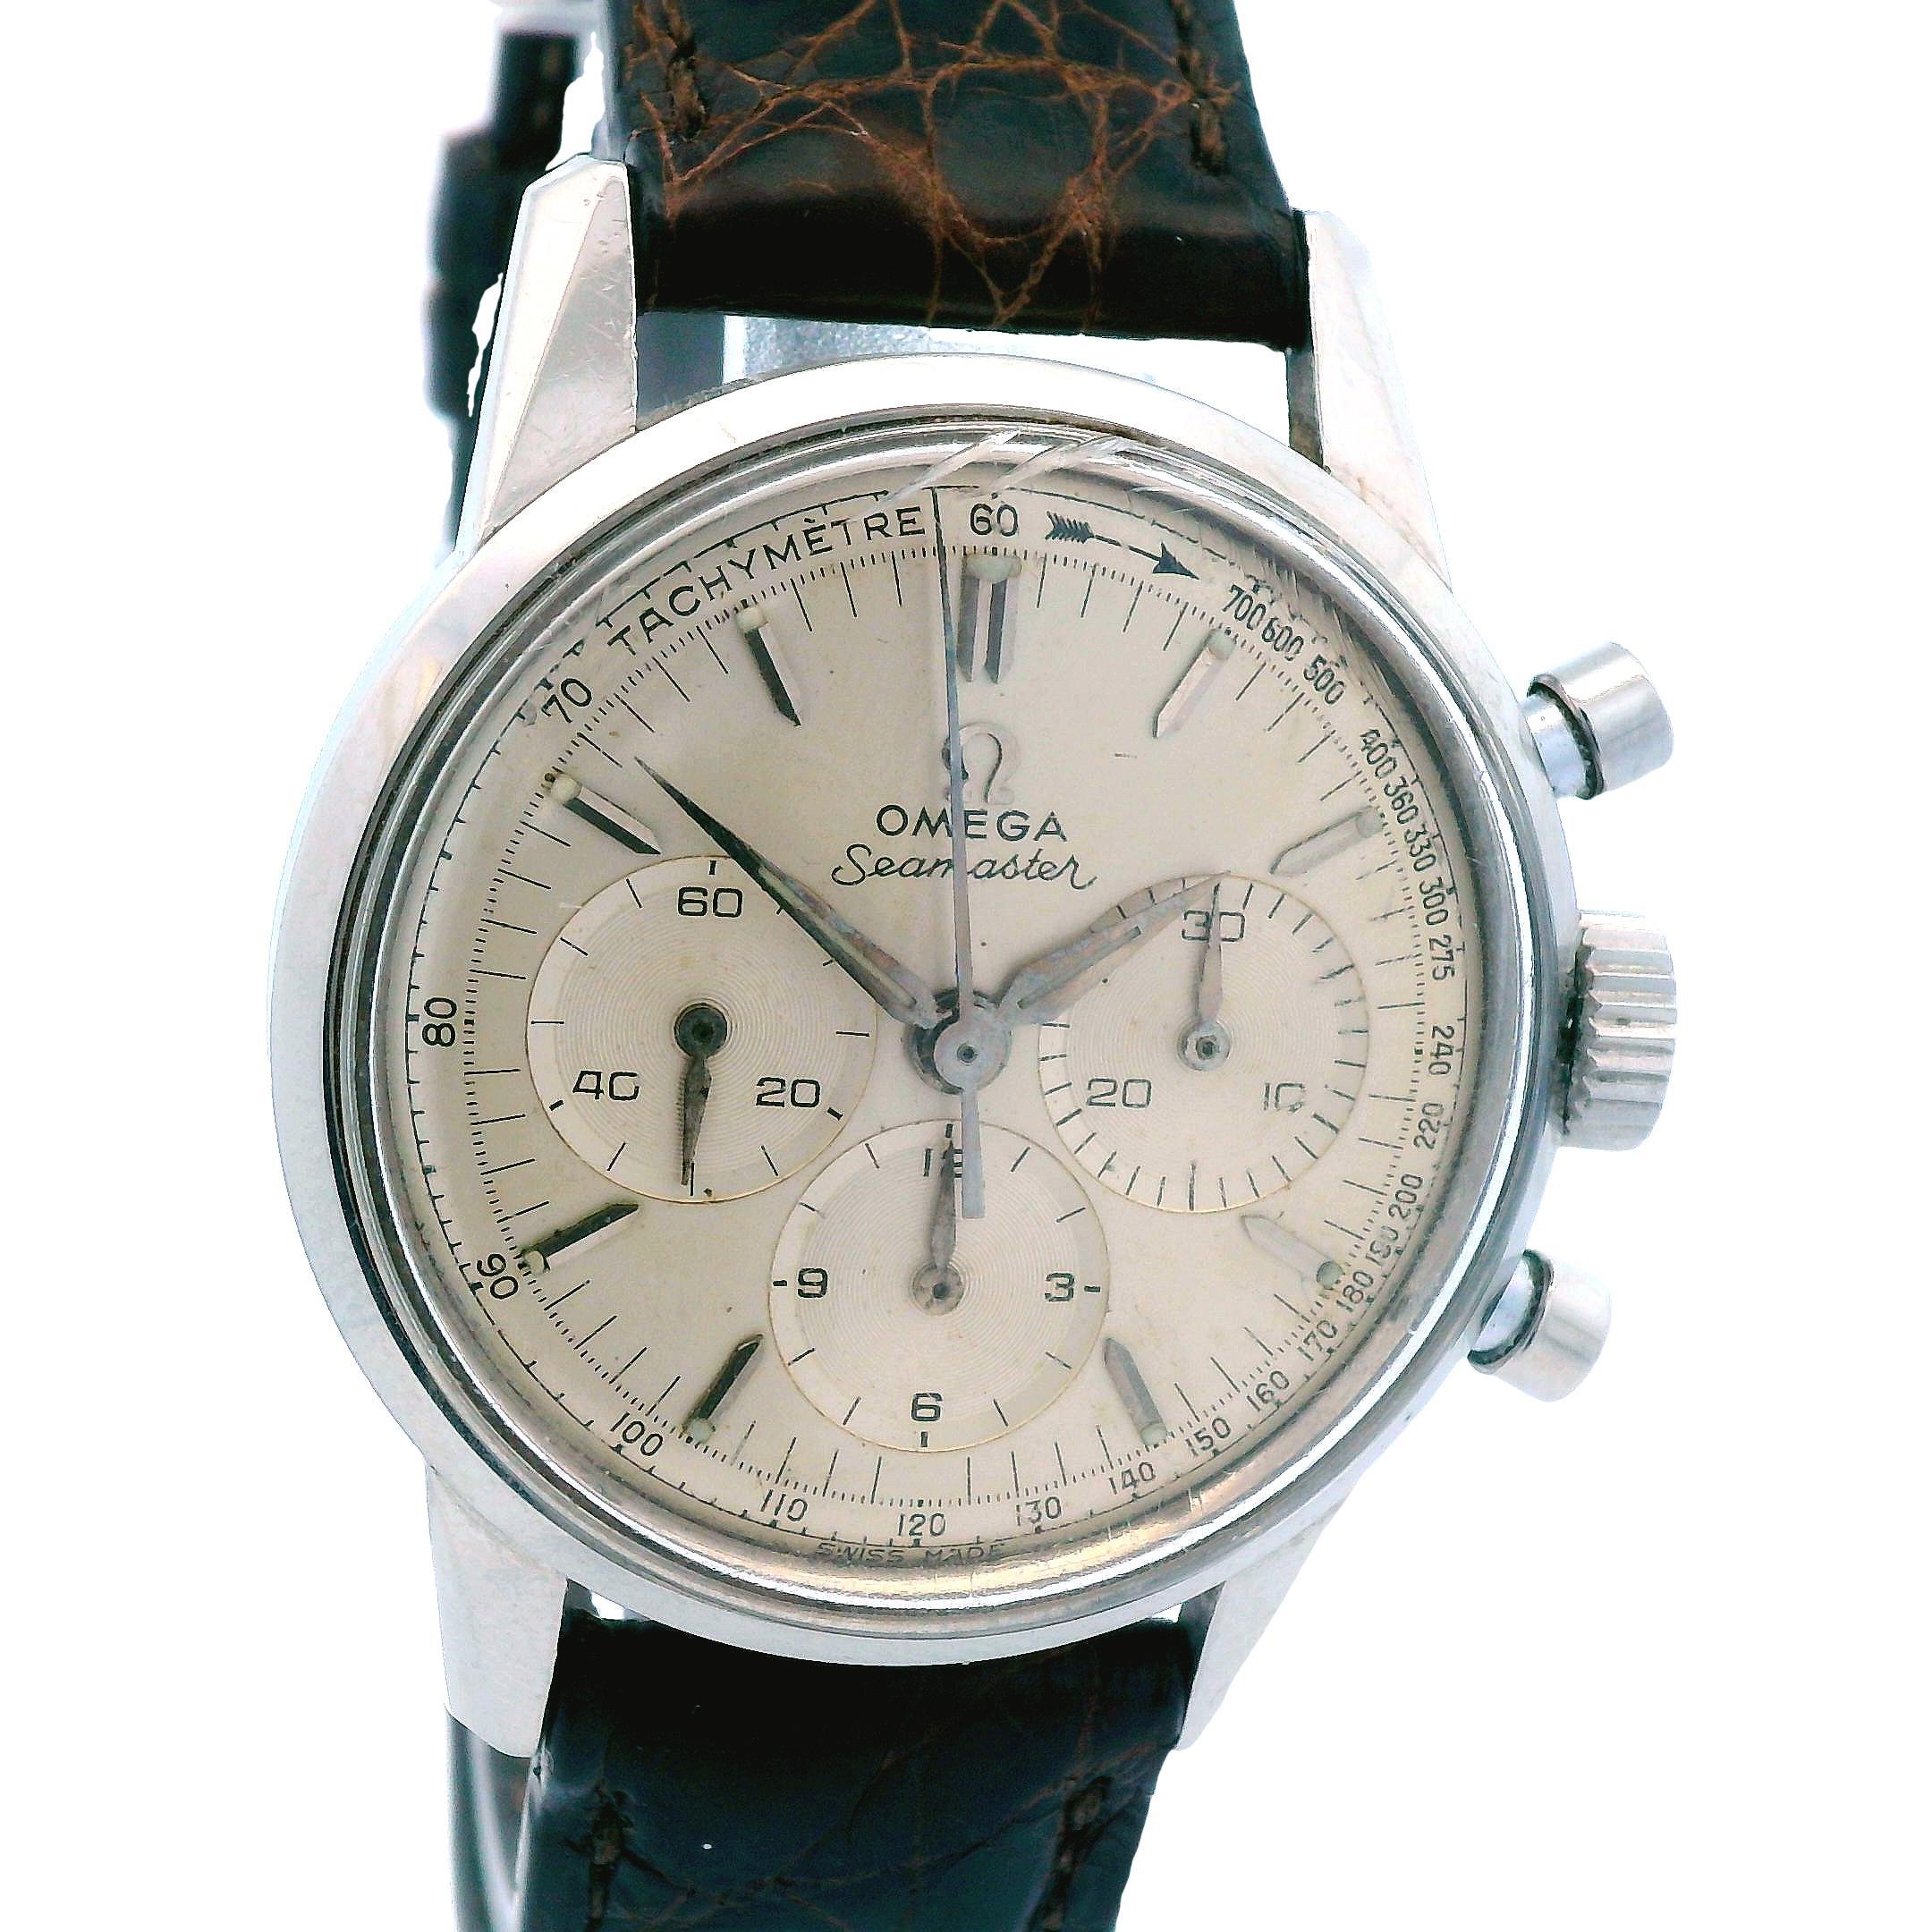 1960s Omega Seamaster Chronograph Watch in Stainless Steel - Running For Sale 2